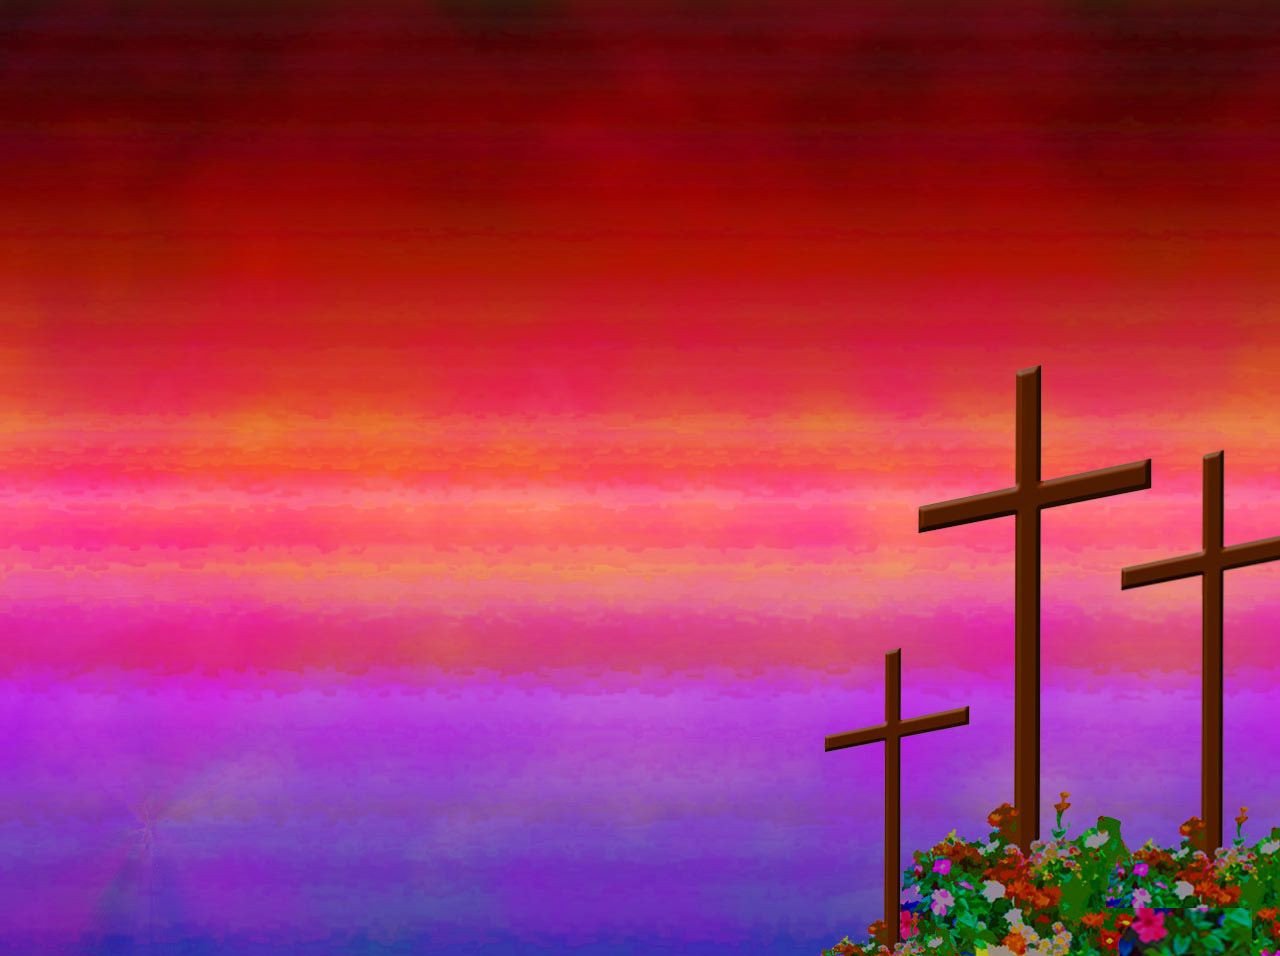 Christian rose garden PowerPoint background Available in